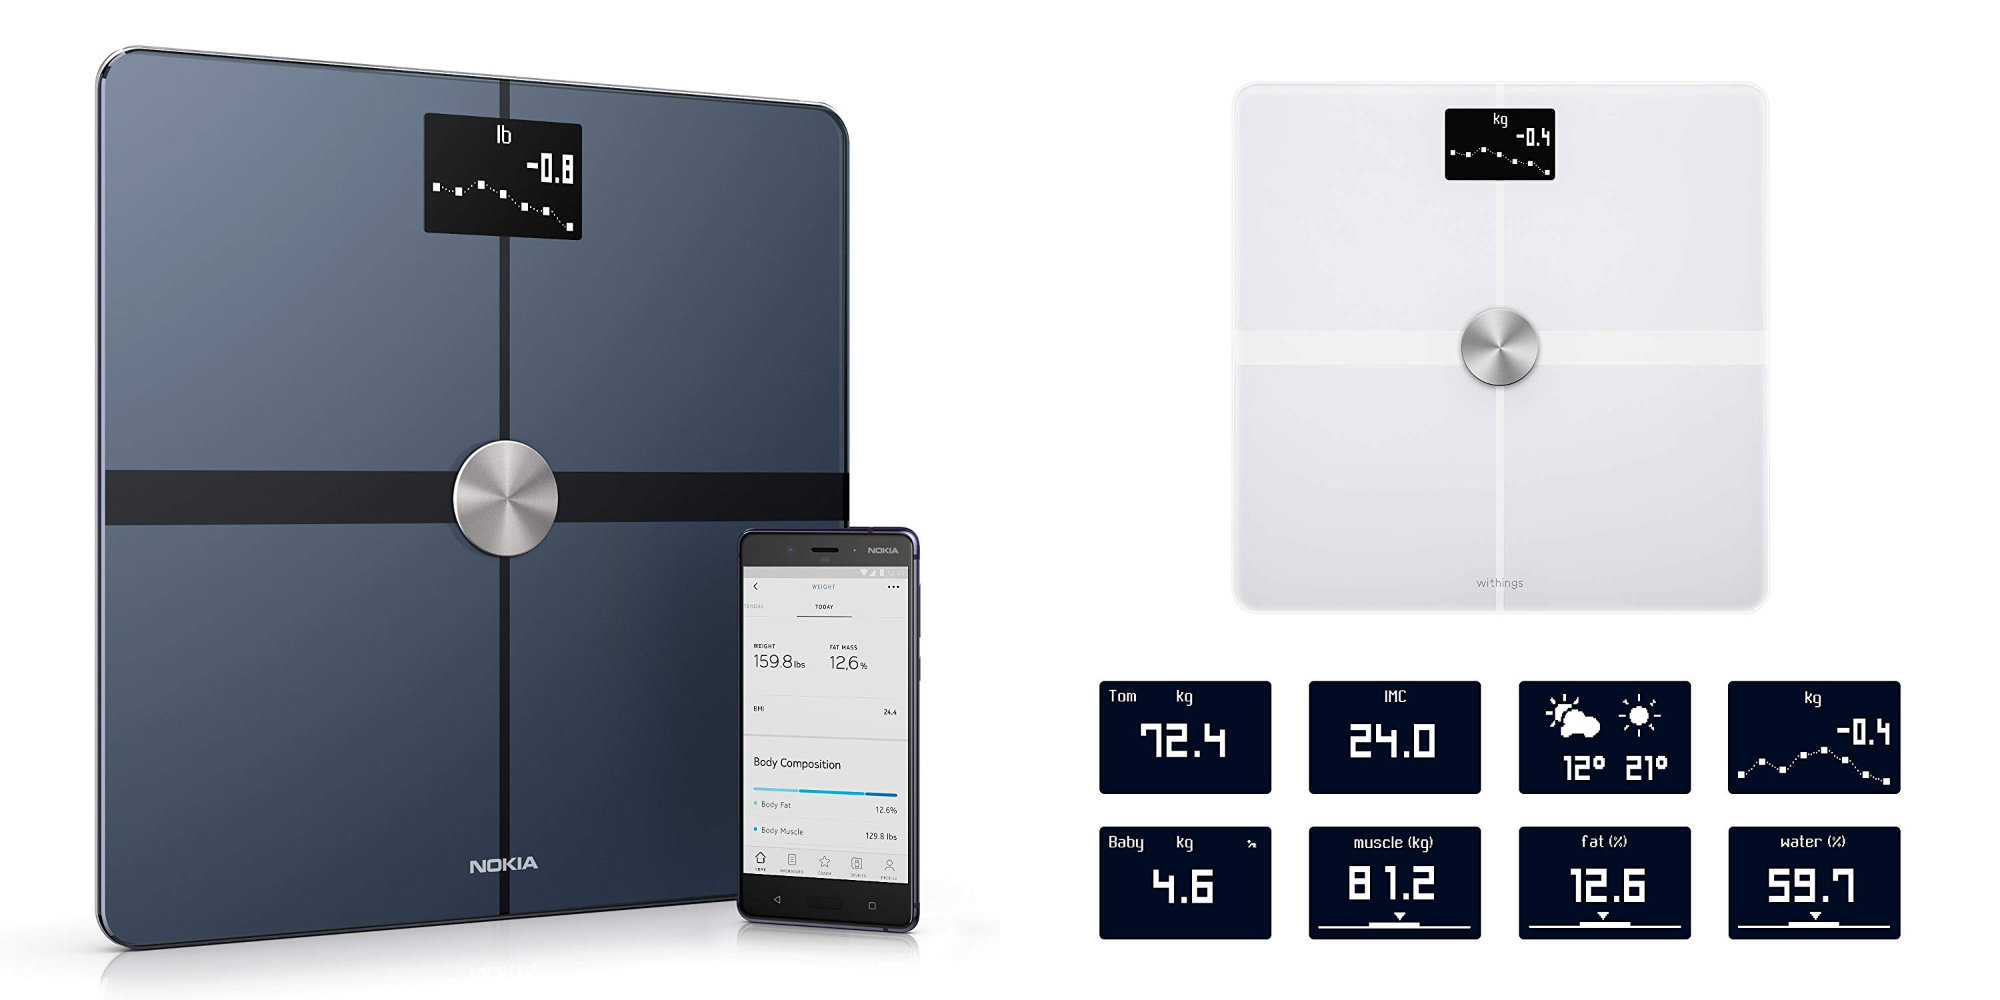 nokia weighing scale compatible with only 2.4 ghz wifi